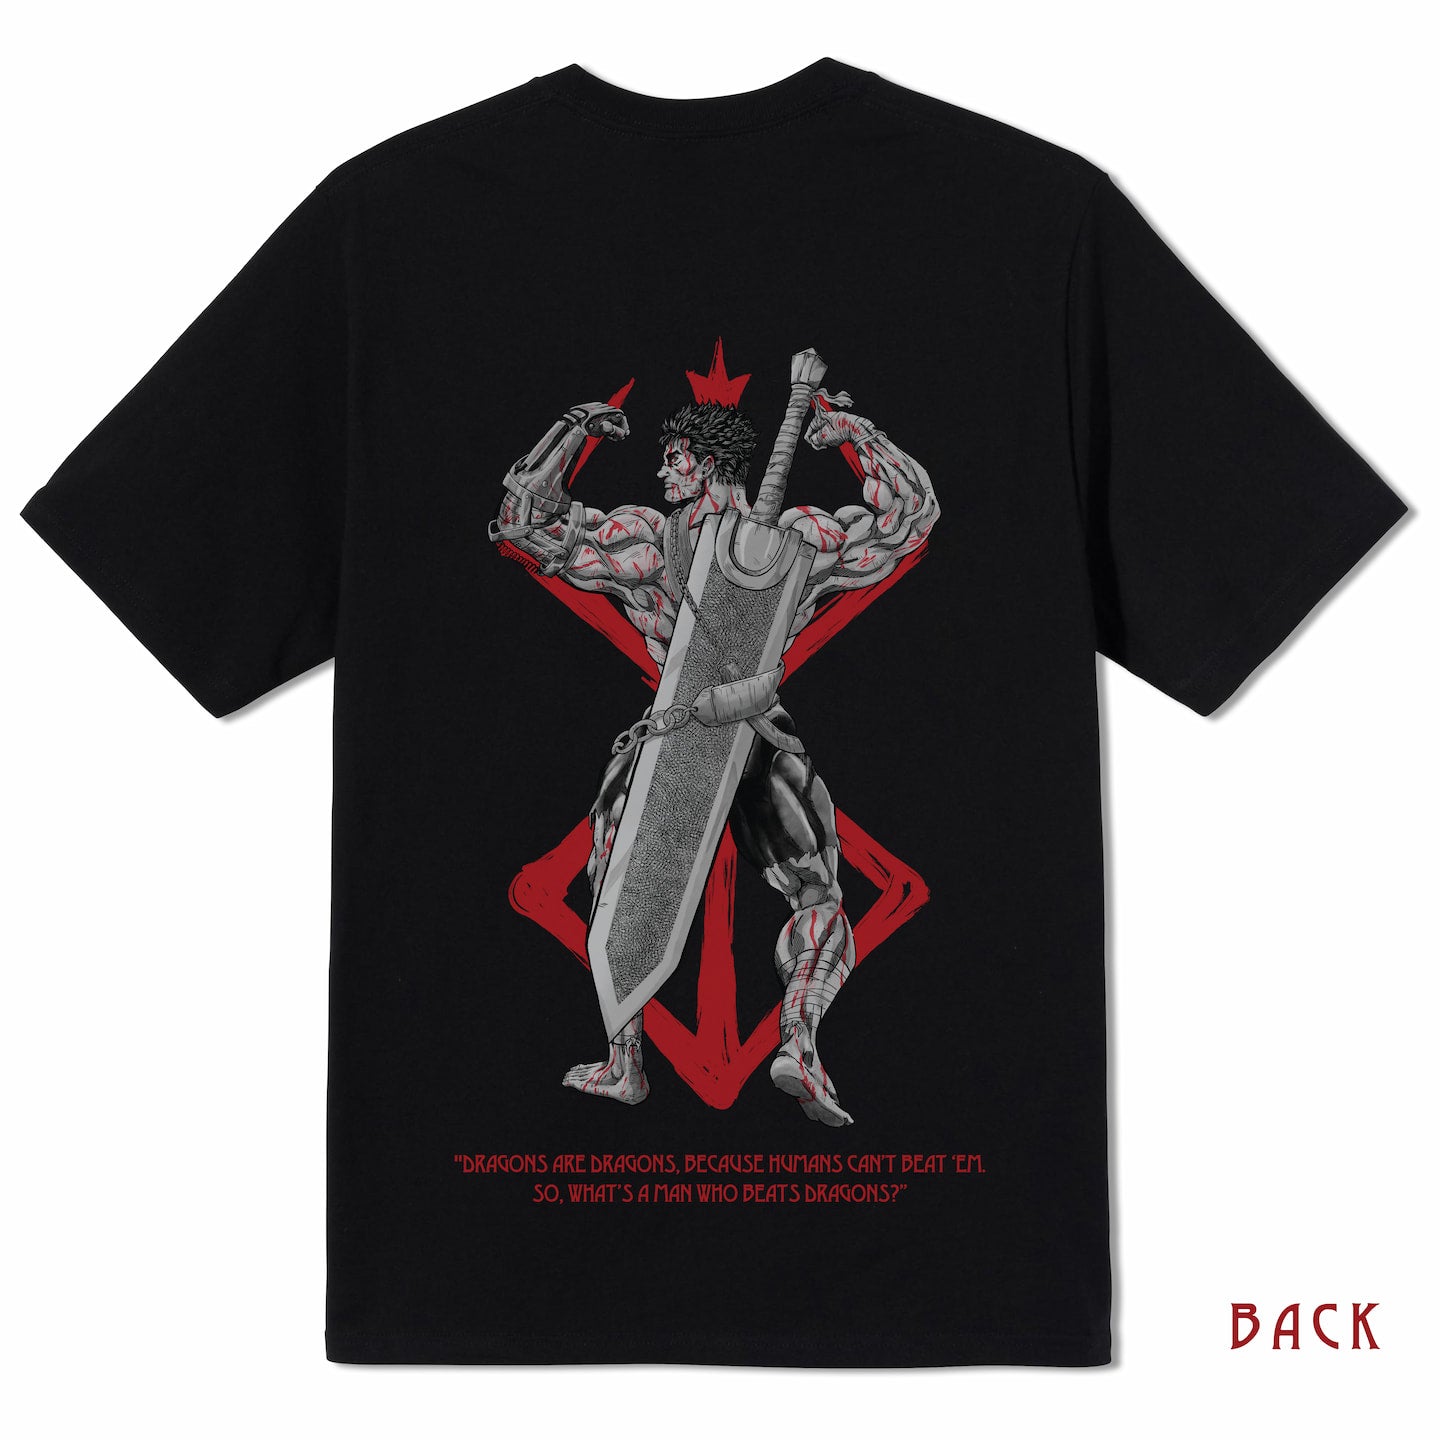 Does anyone know where this shirt can be purchased? : r/Berserk